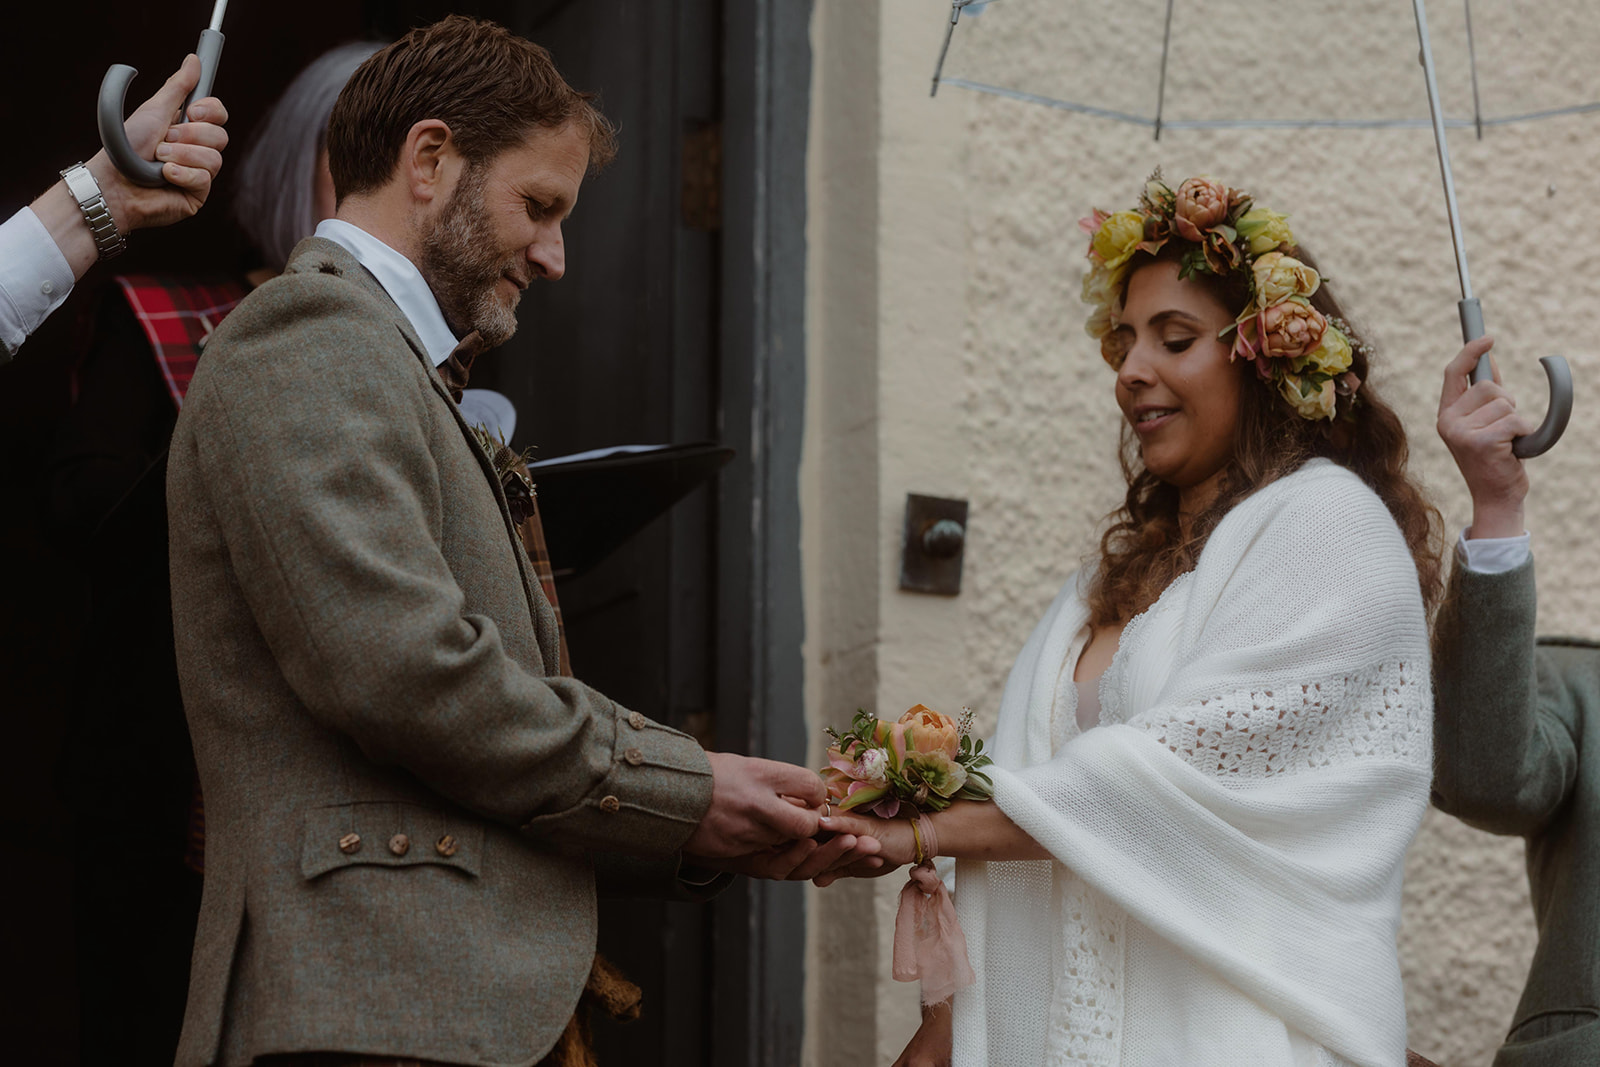 Rebecca and Simon shared their vows to each other during their Isle of Skye elopement ceremony.